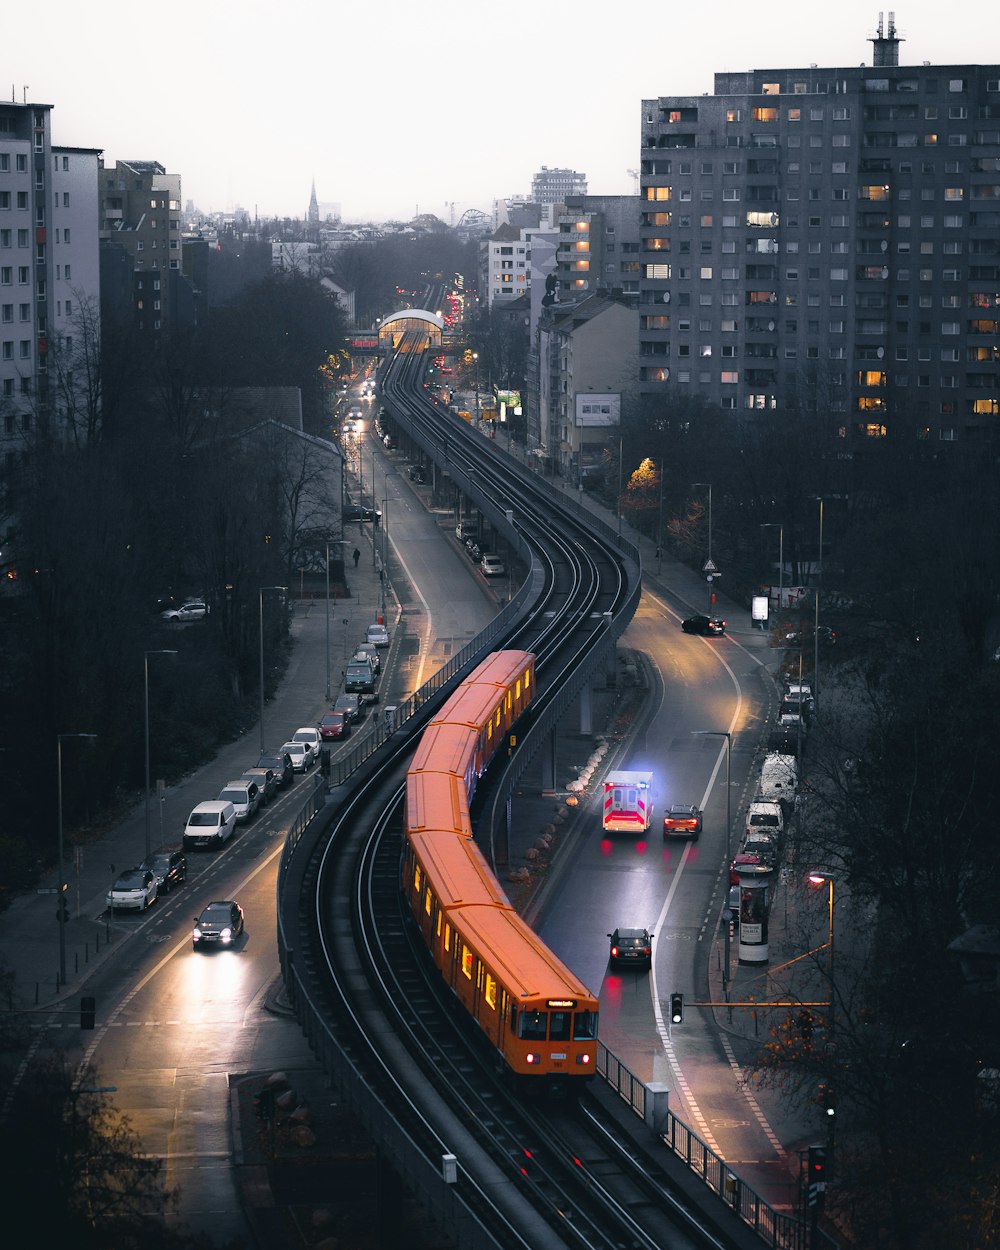 a train on a train track in a city